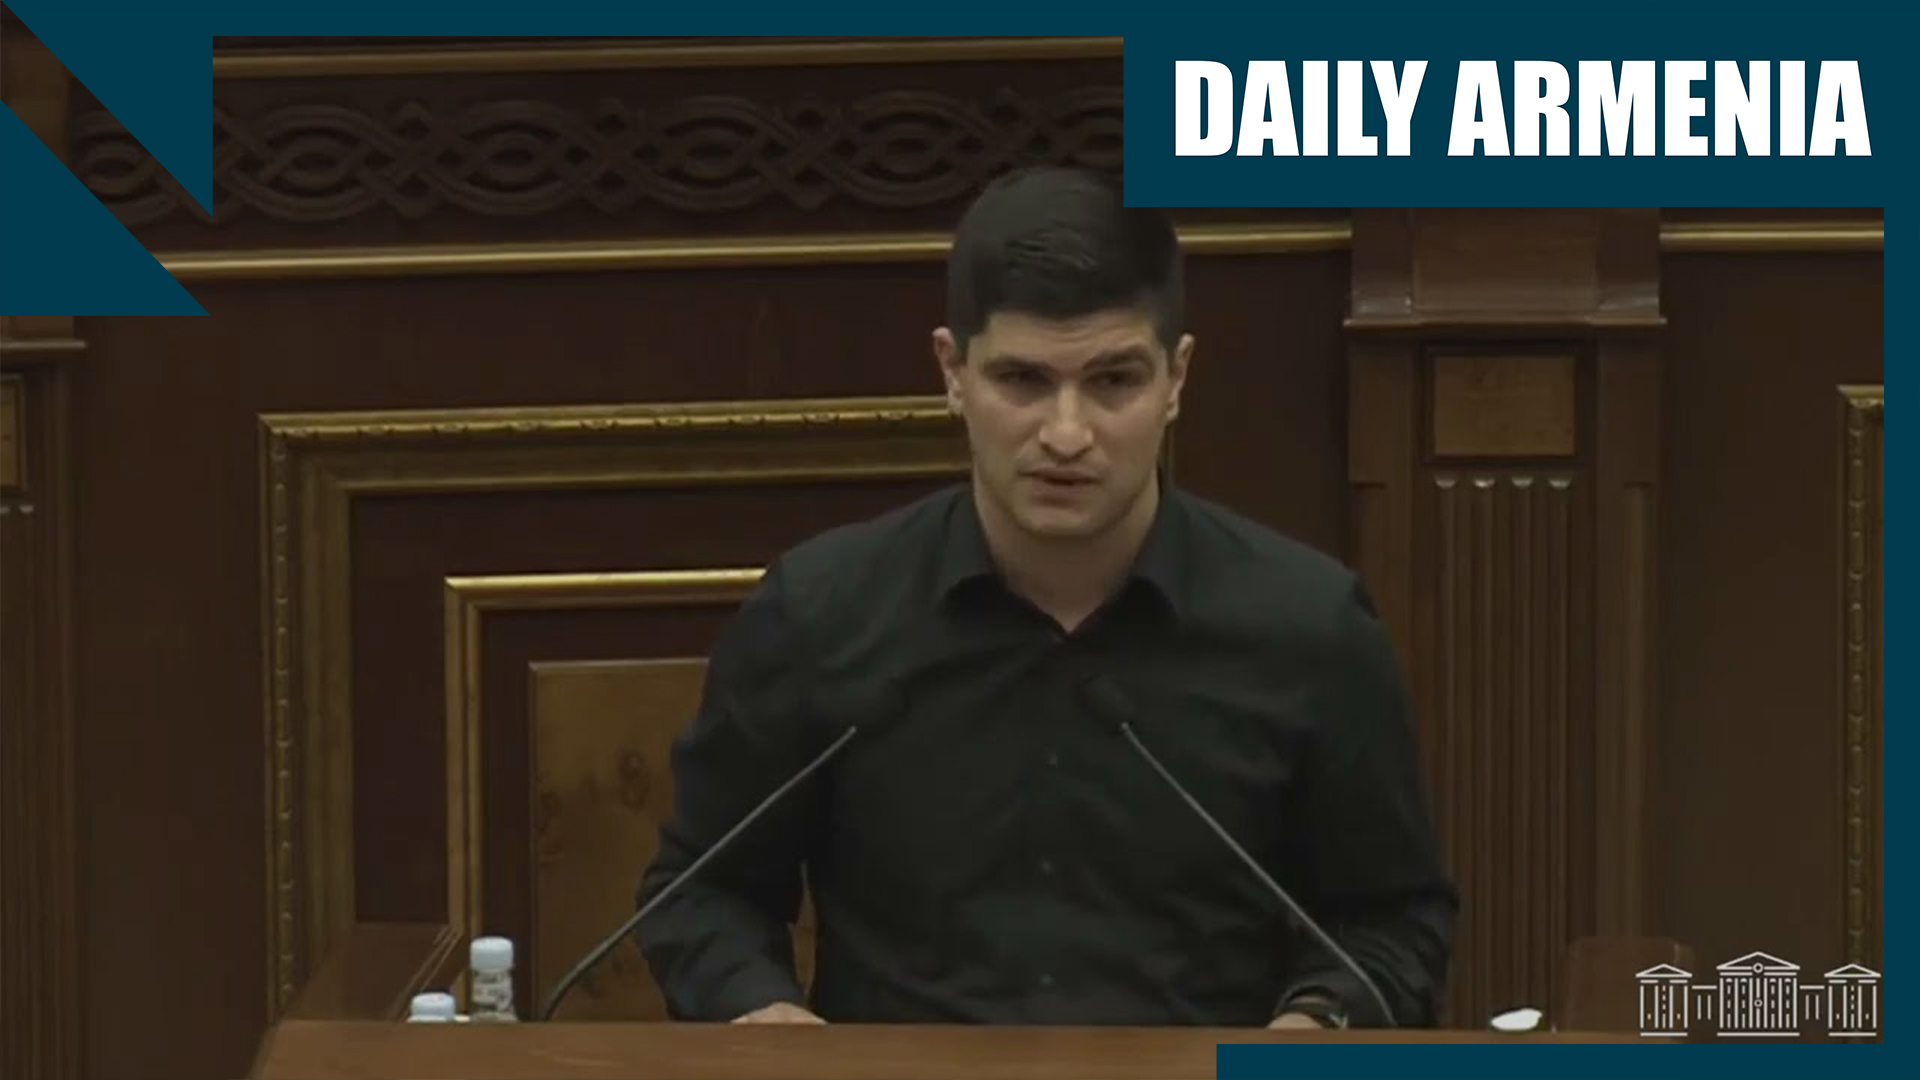 Azerbaijani soldier who crossed into Armenia murdered Armenian civilian, says ruling party MP